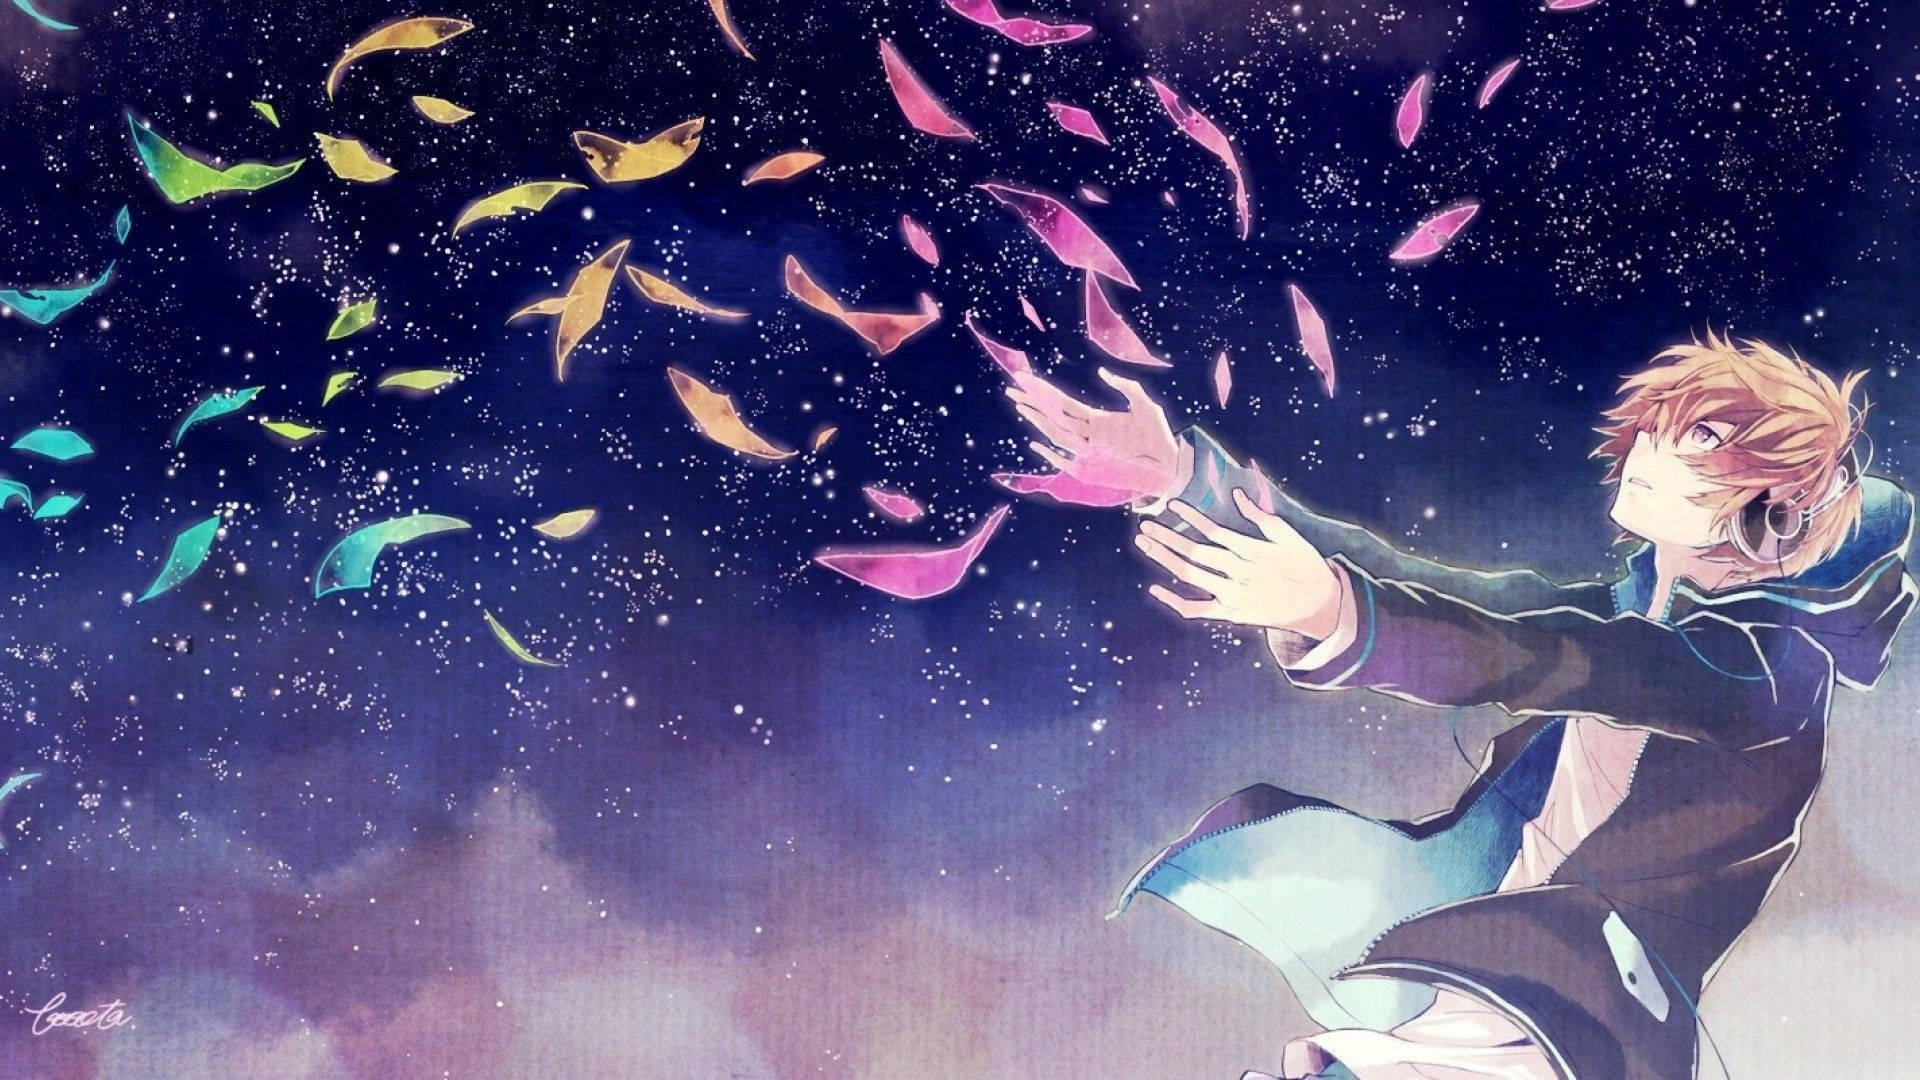 Cool anime wallpaper of a boy dreaming in a blue starry background.